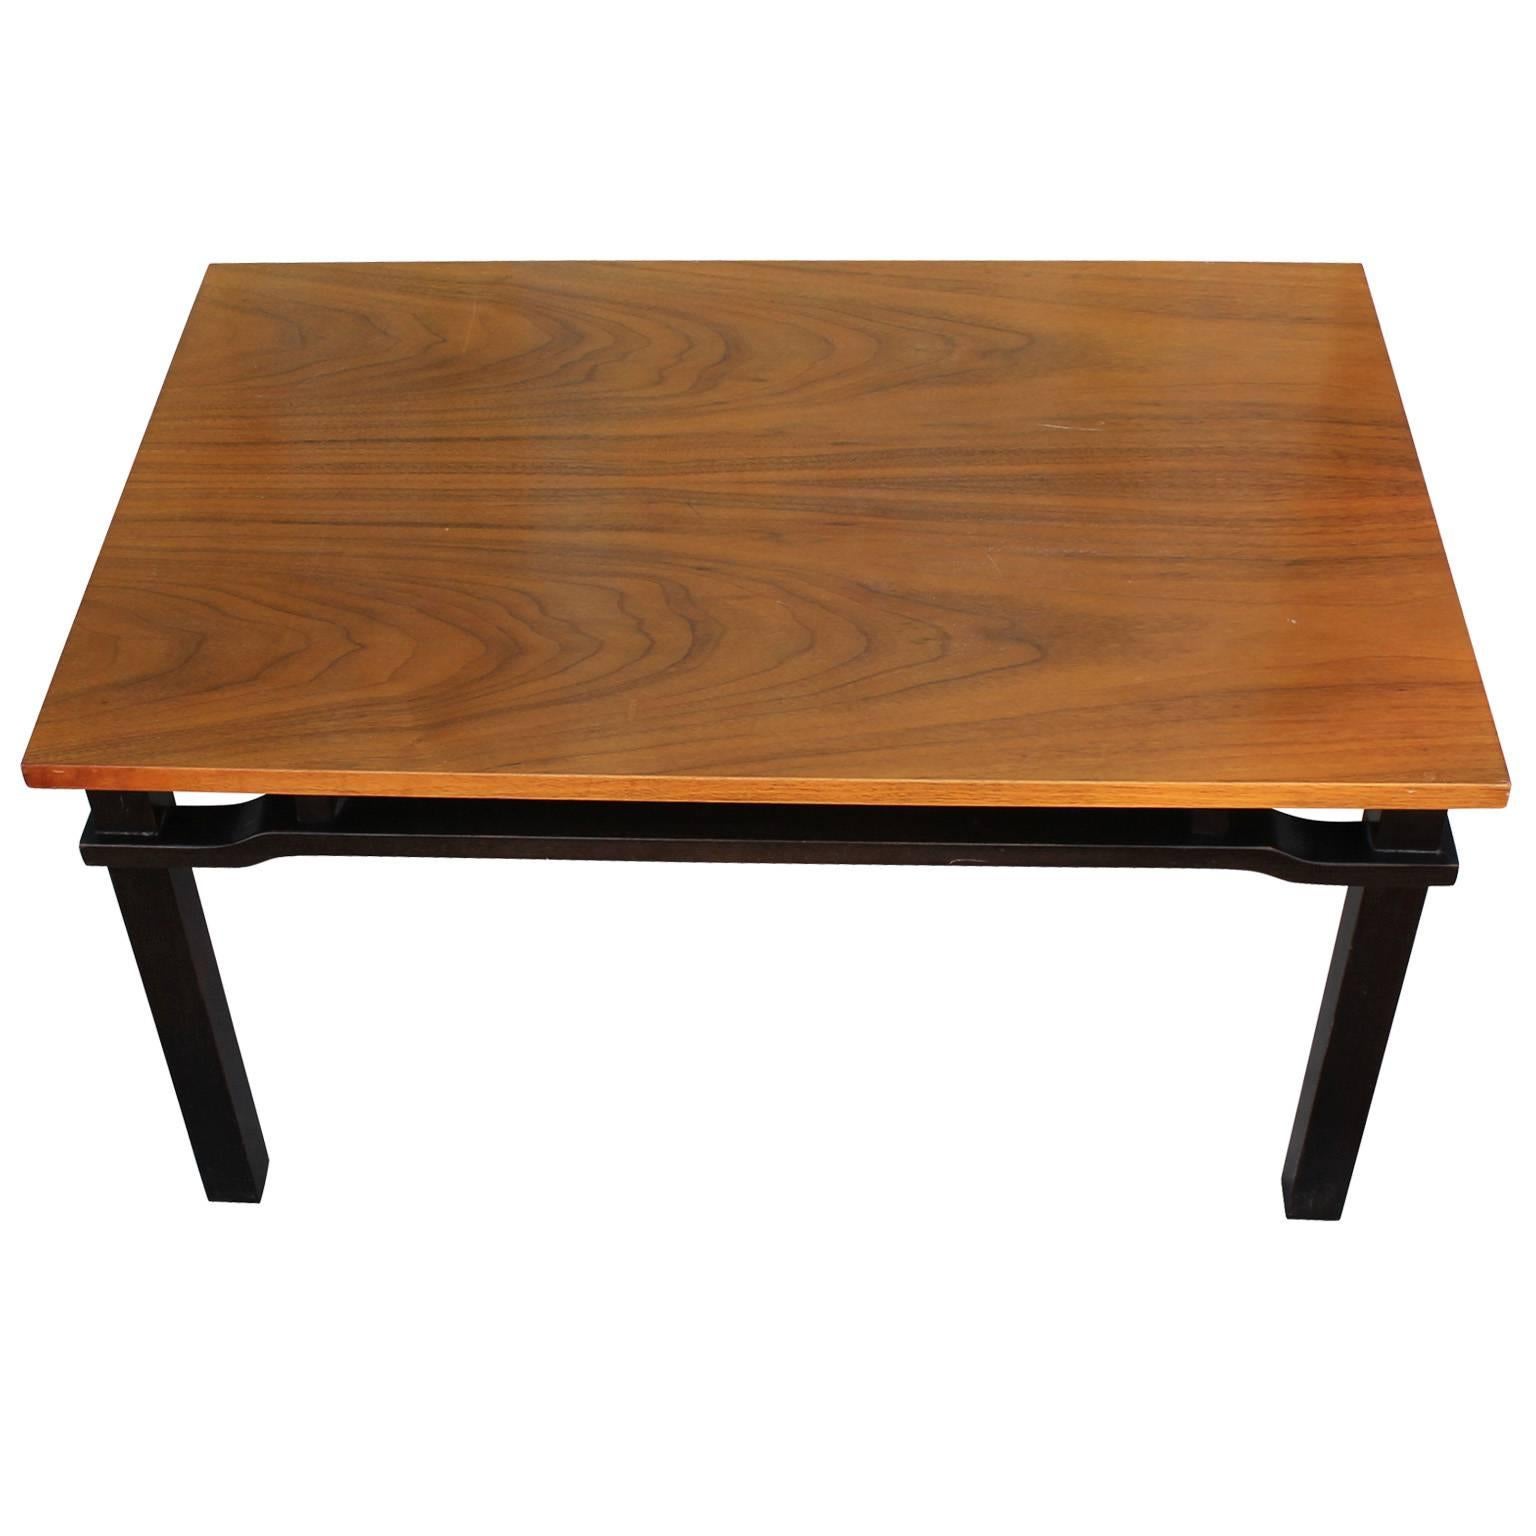 Wonderful cocktail or coffee table in the style of Dunbar,  Baker Furniture, or Michael Taylor. Base is stained in a deep ebony. Lively grain. Matching side tables available. 